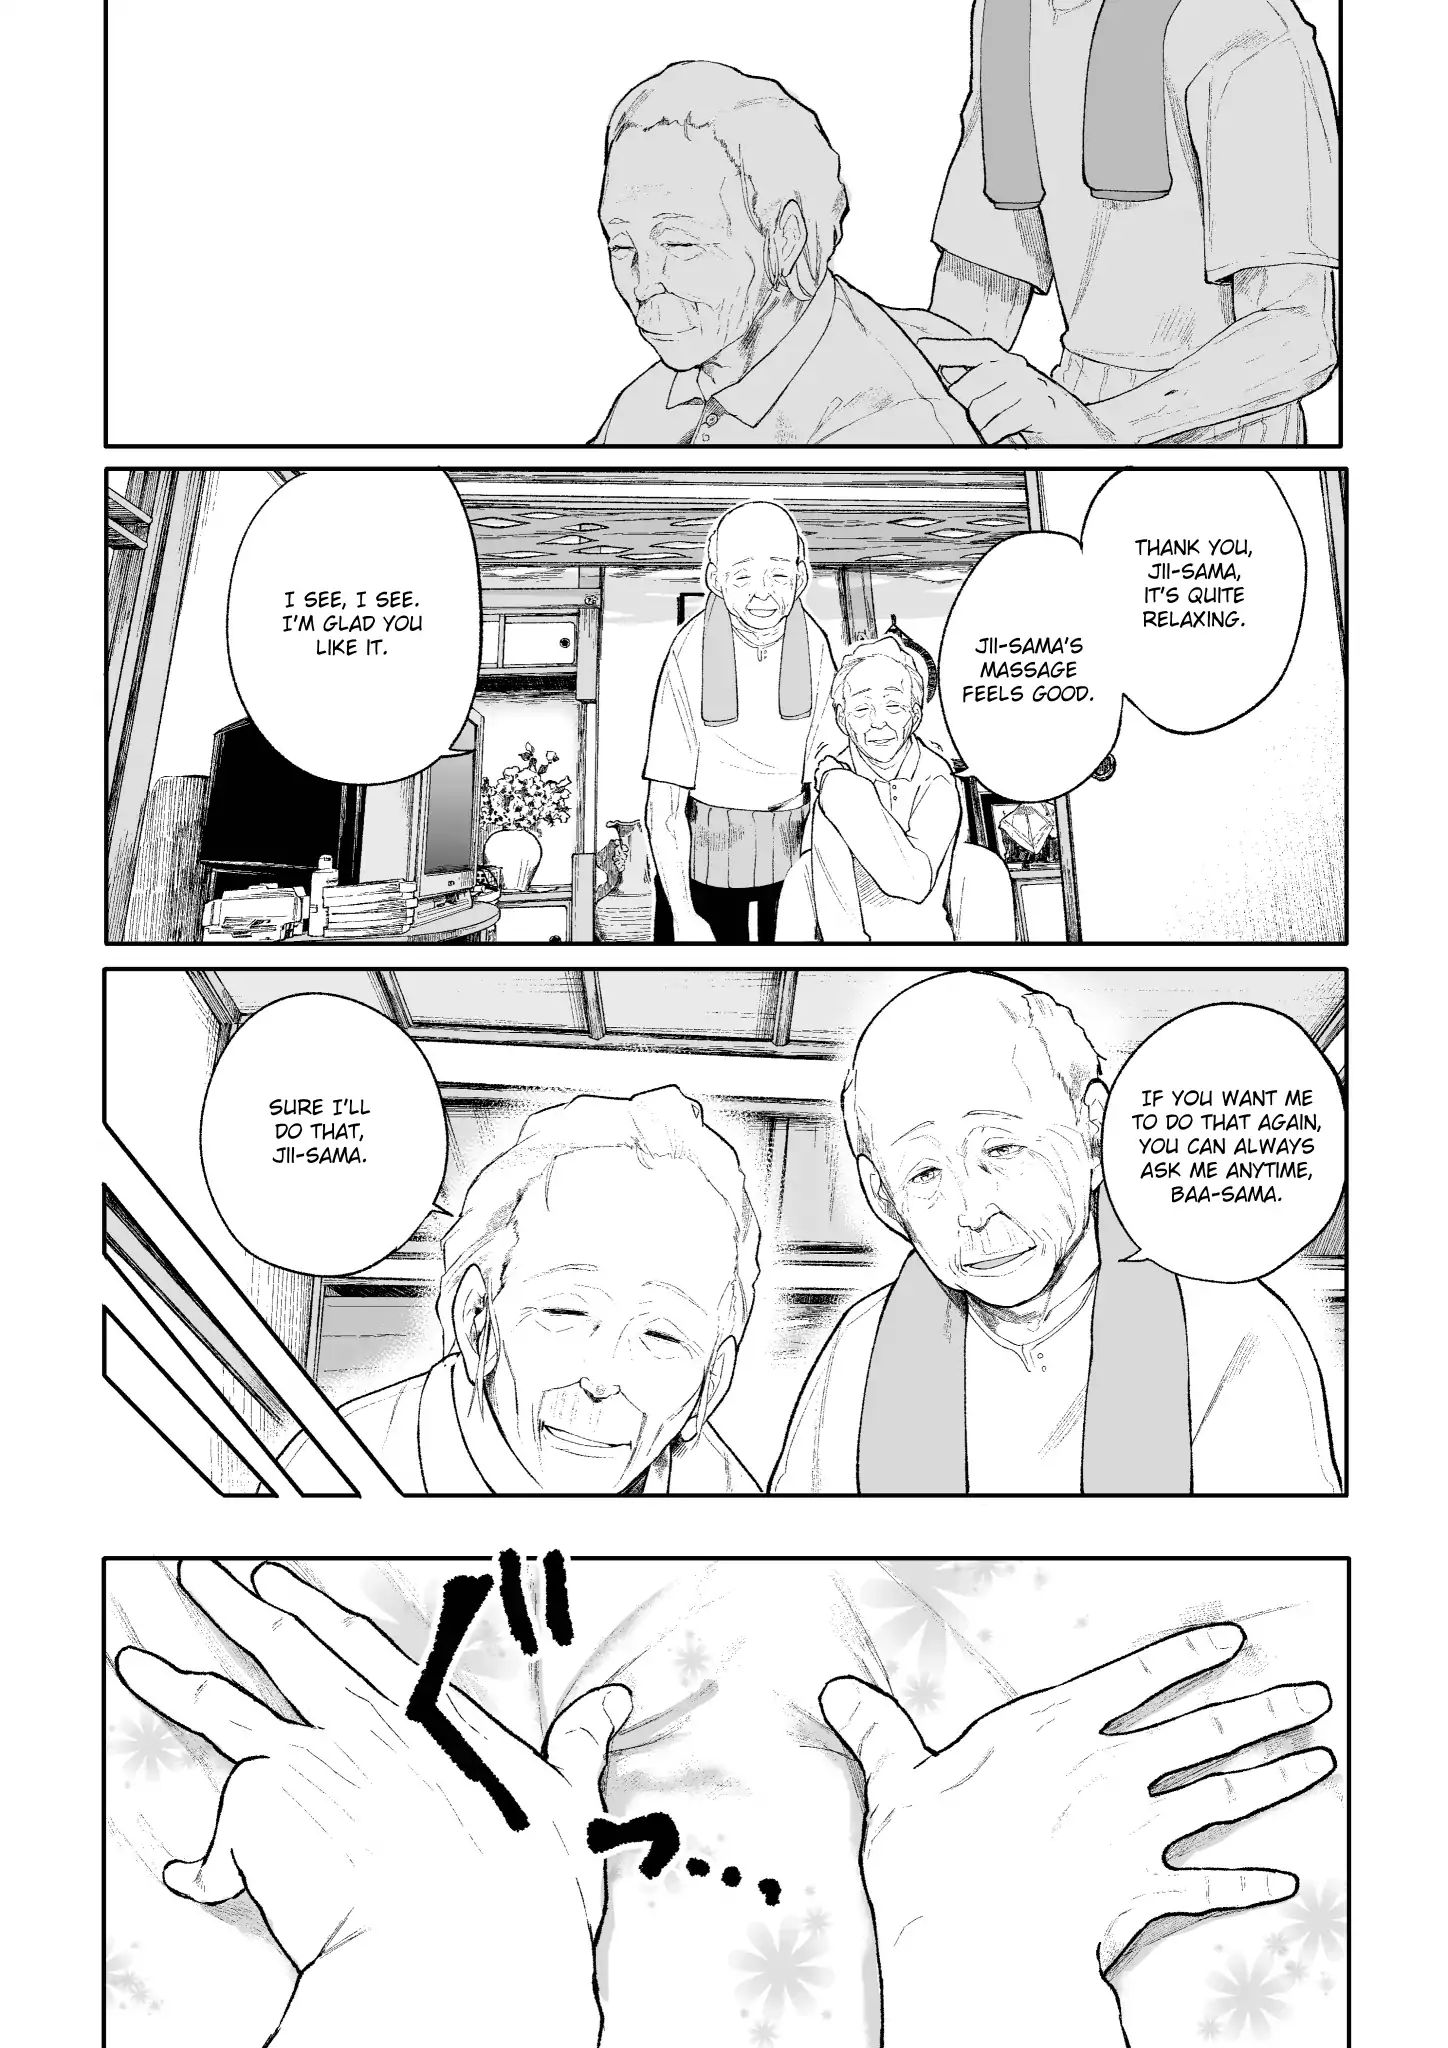 A Story About A Grampa And Granma Returned Back To Their Youth. Chapter 9